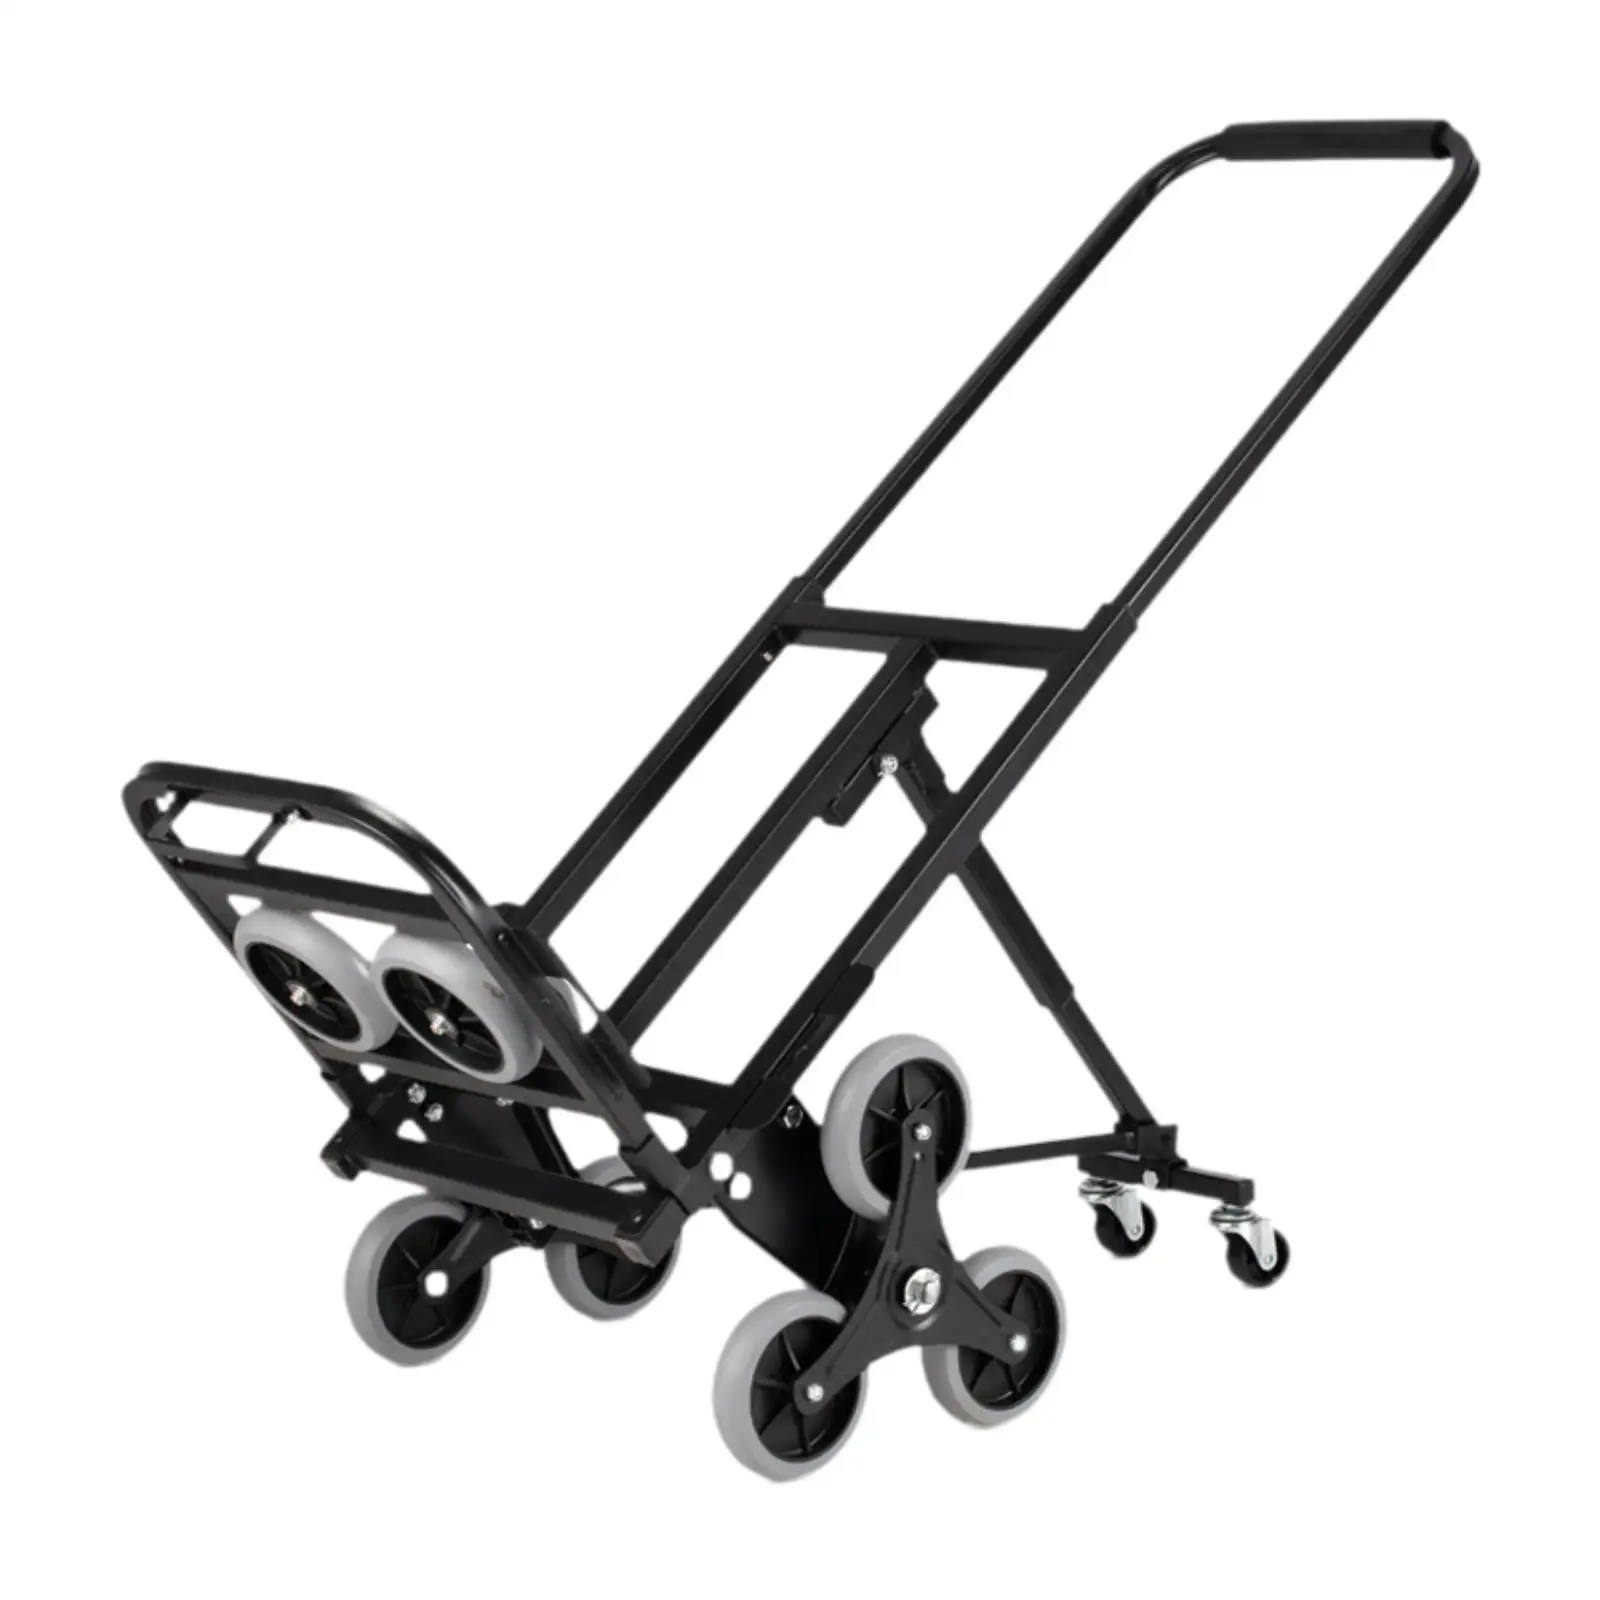 

Stair Climbing Cart Trolley Cart Portable Heavy Duty Carbon Steel Folding Dolly Hand Truck for Shopping Warehouse Moving